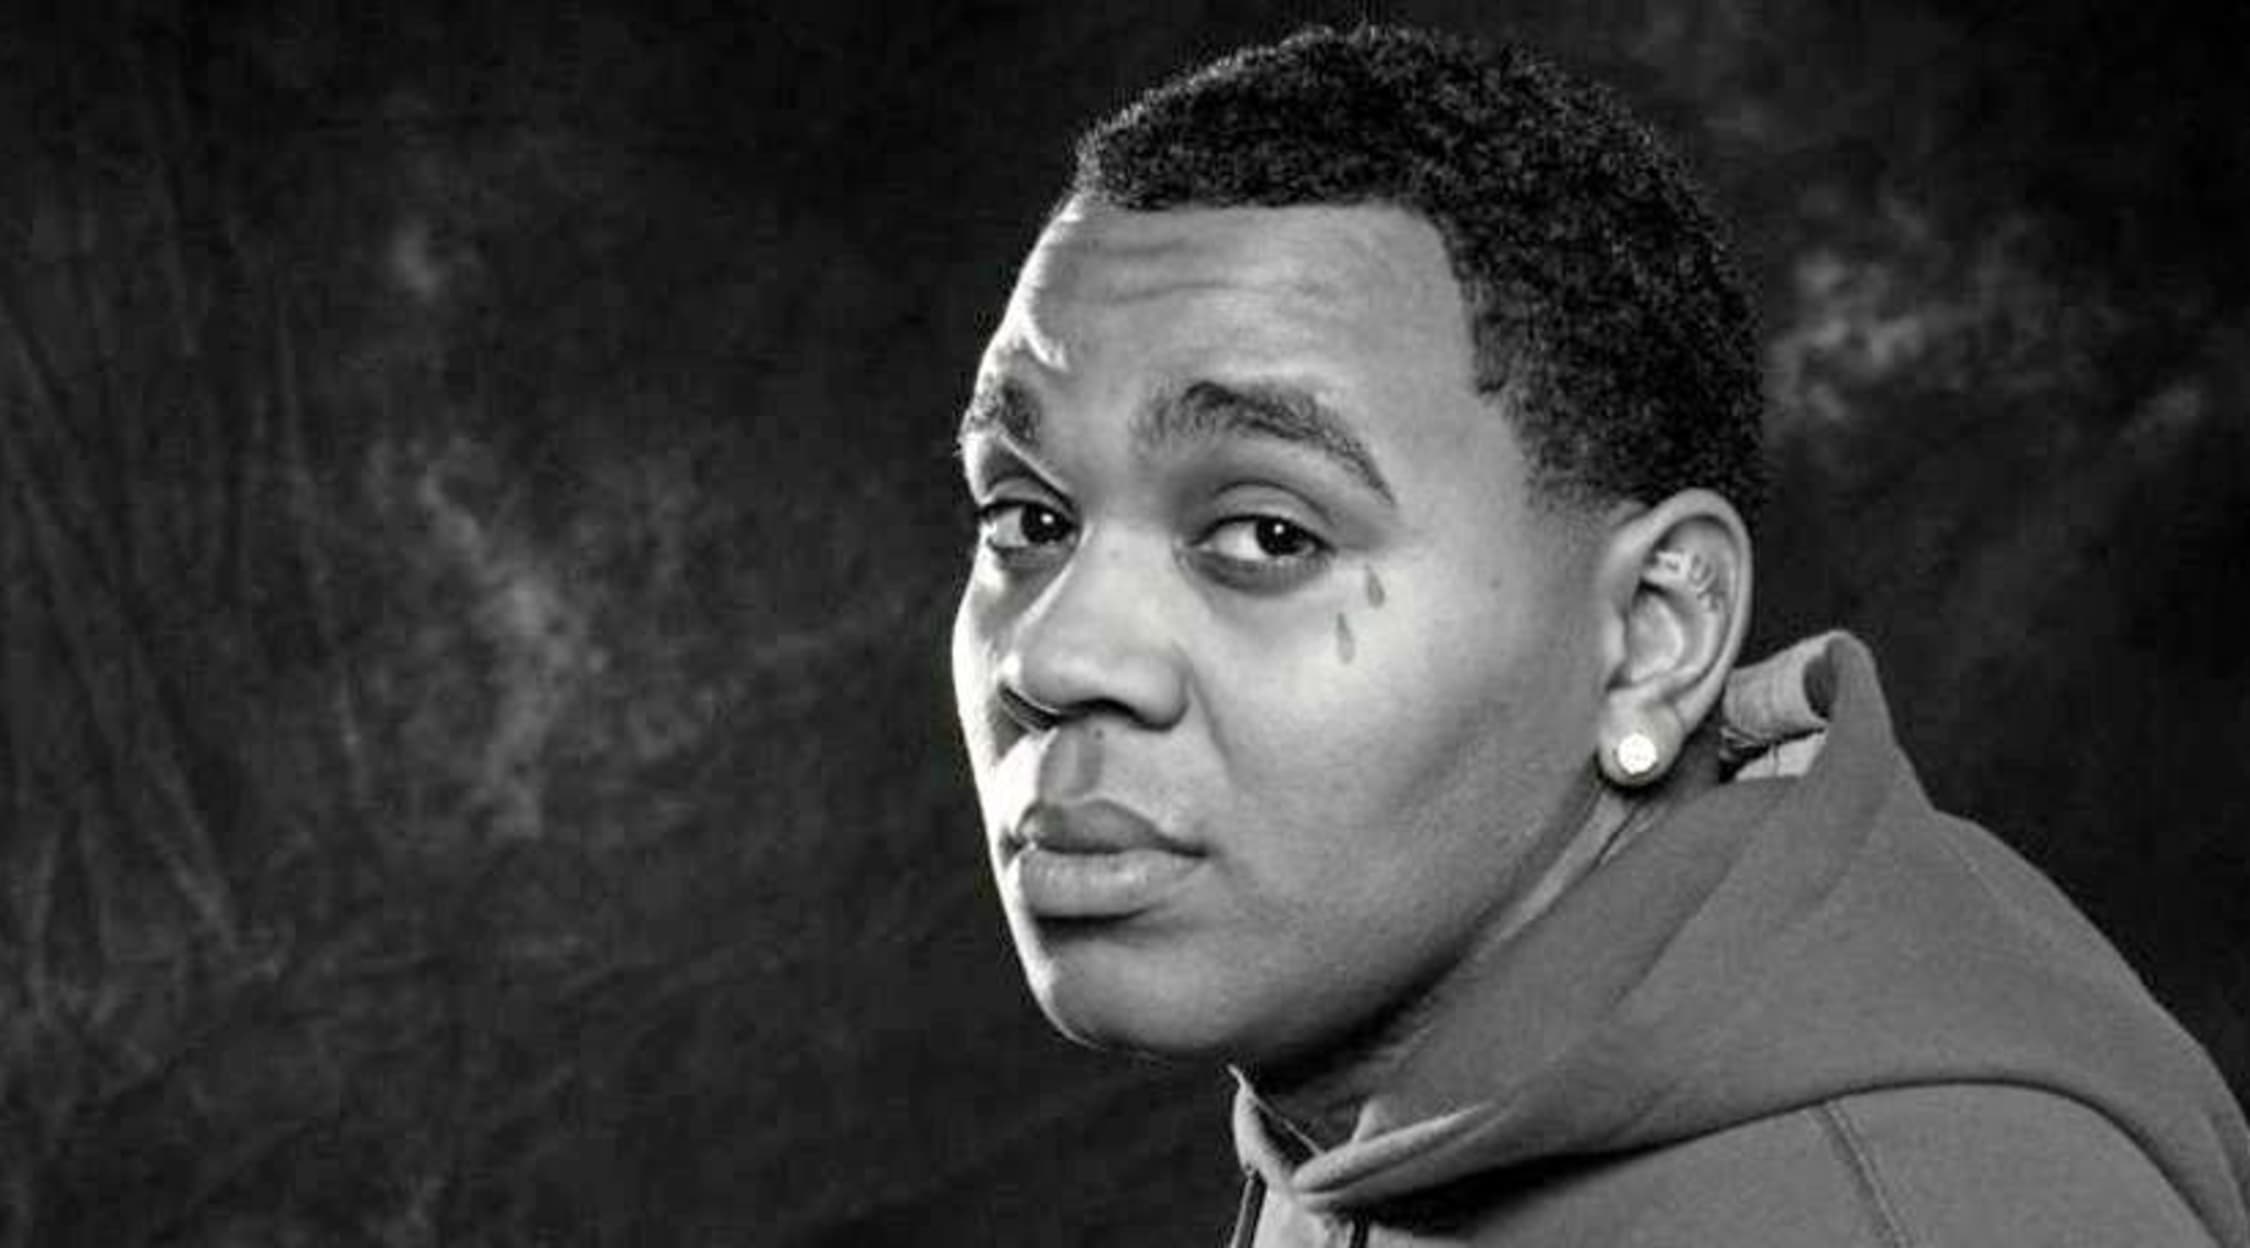 Kevin gates in seattle